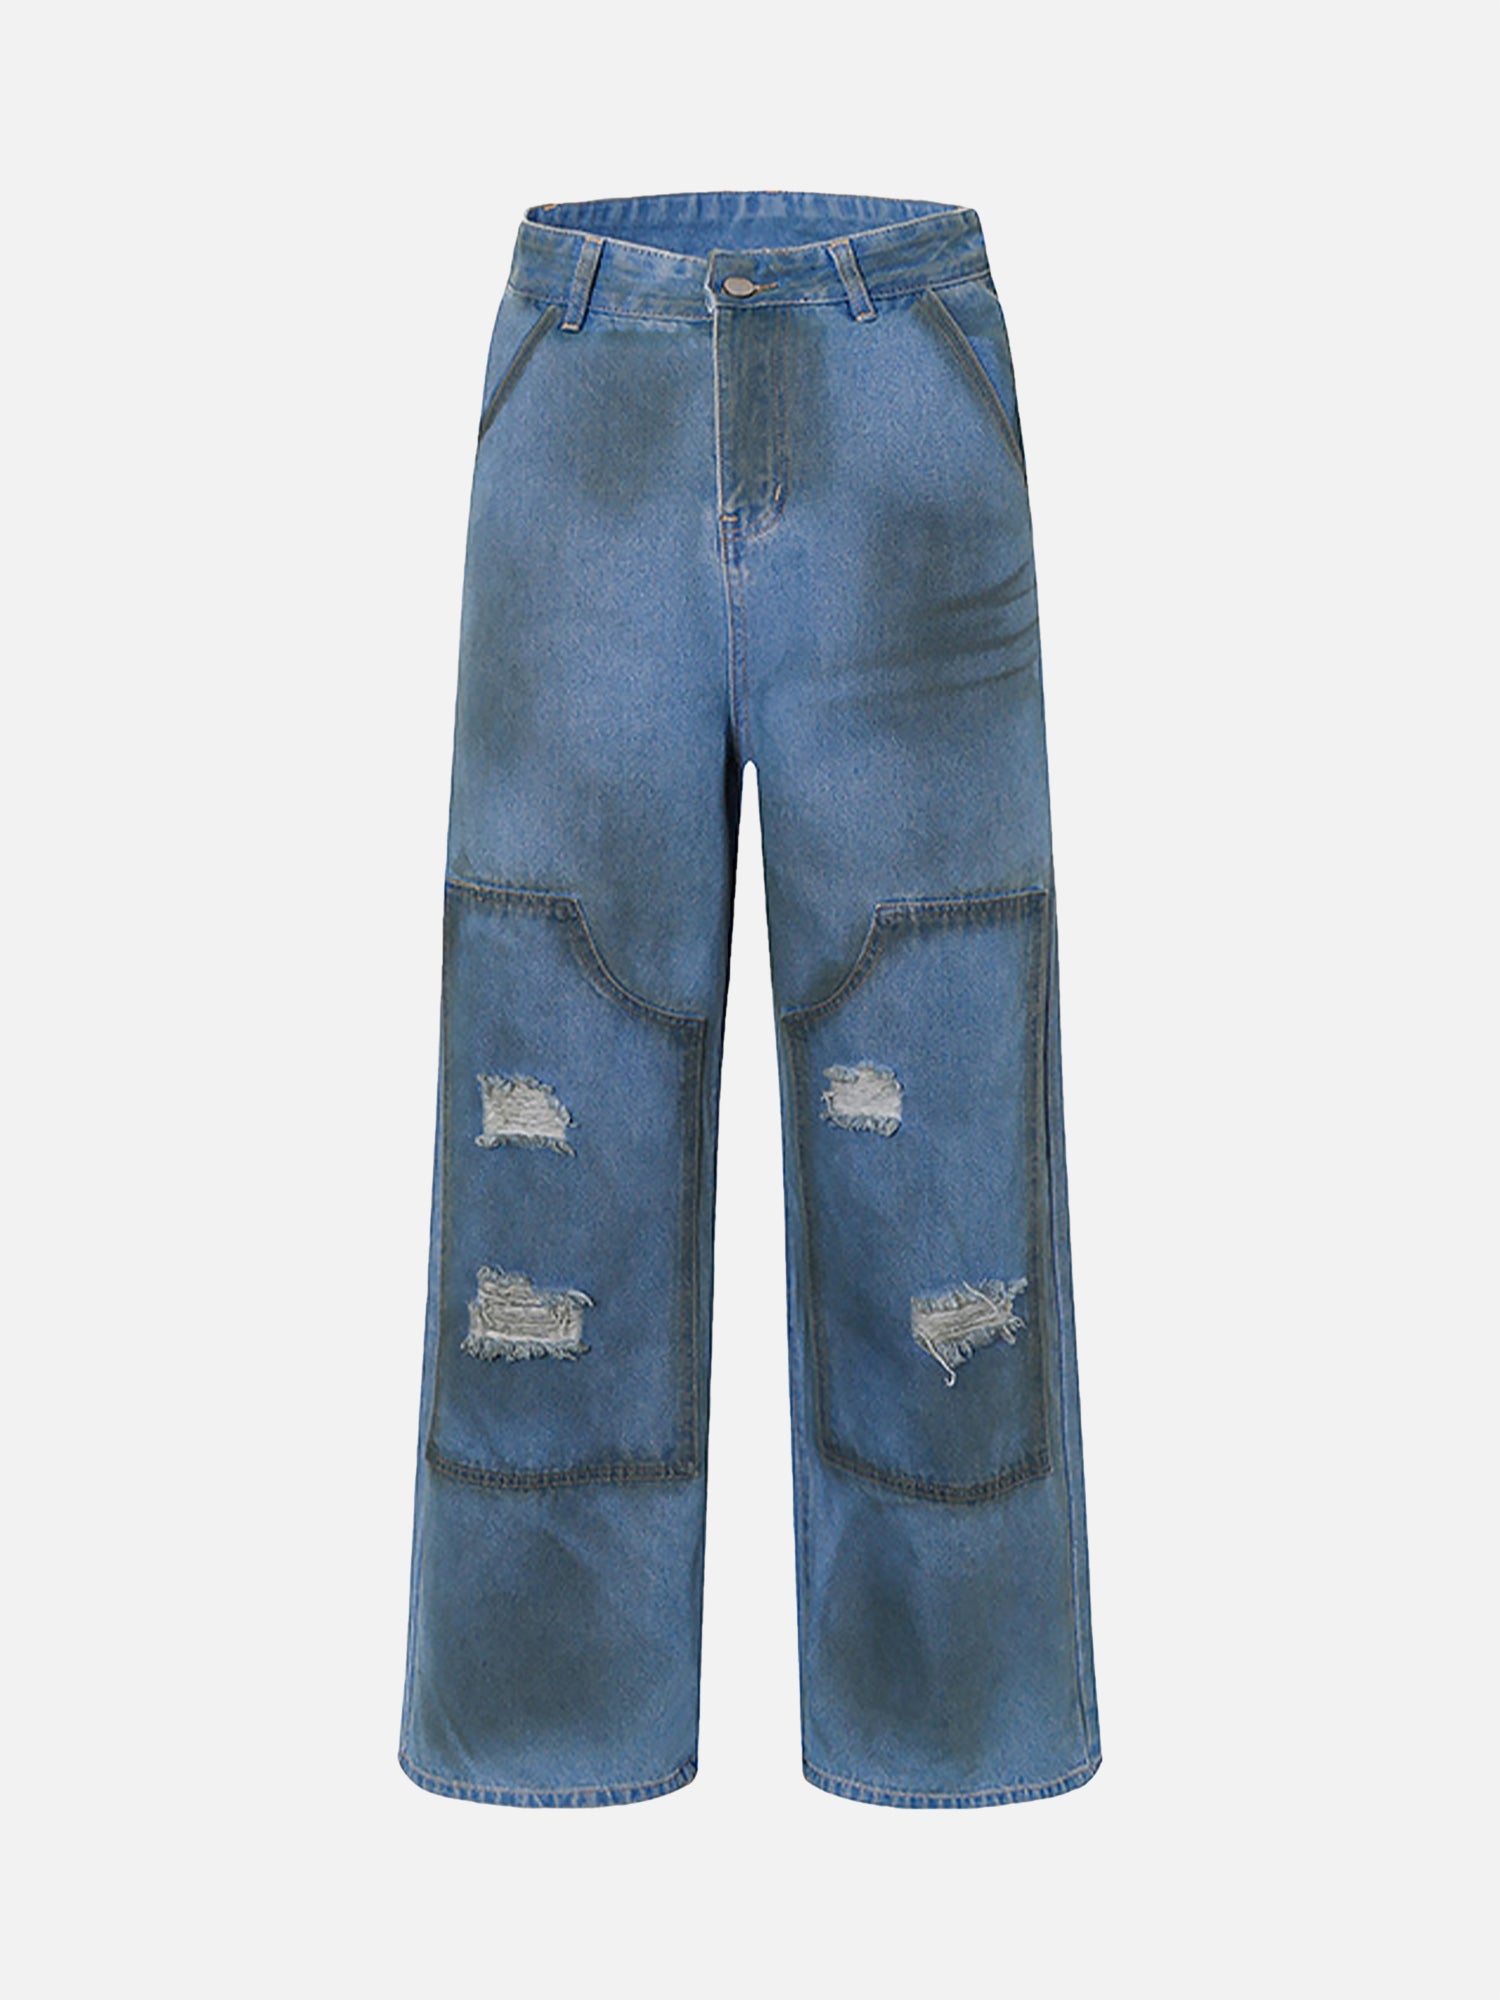 Thesupermade Street Fashion Heavy Industry Washed Distressed Jeans